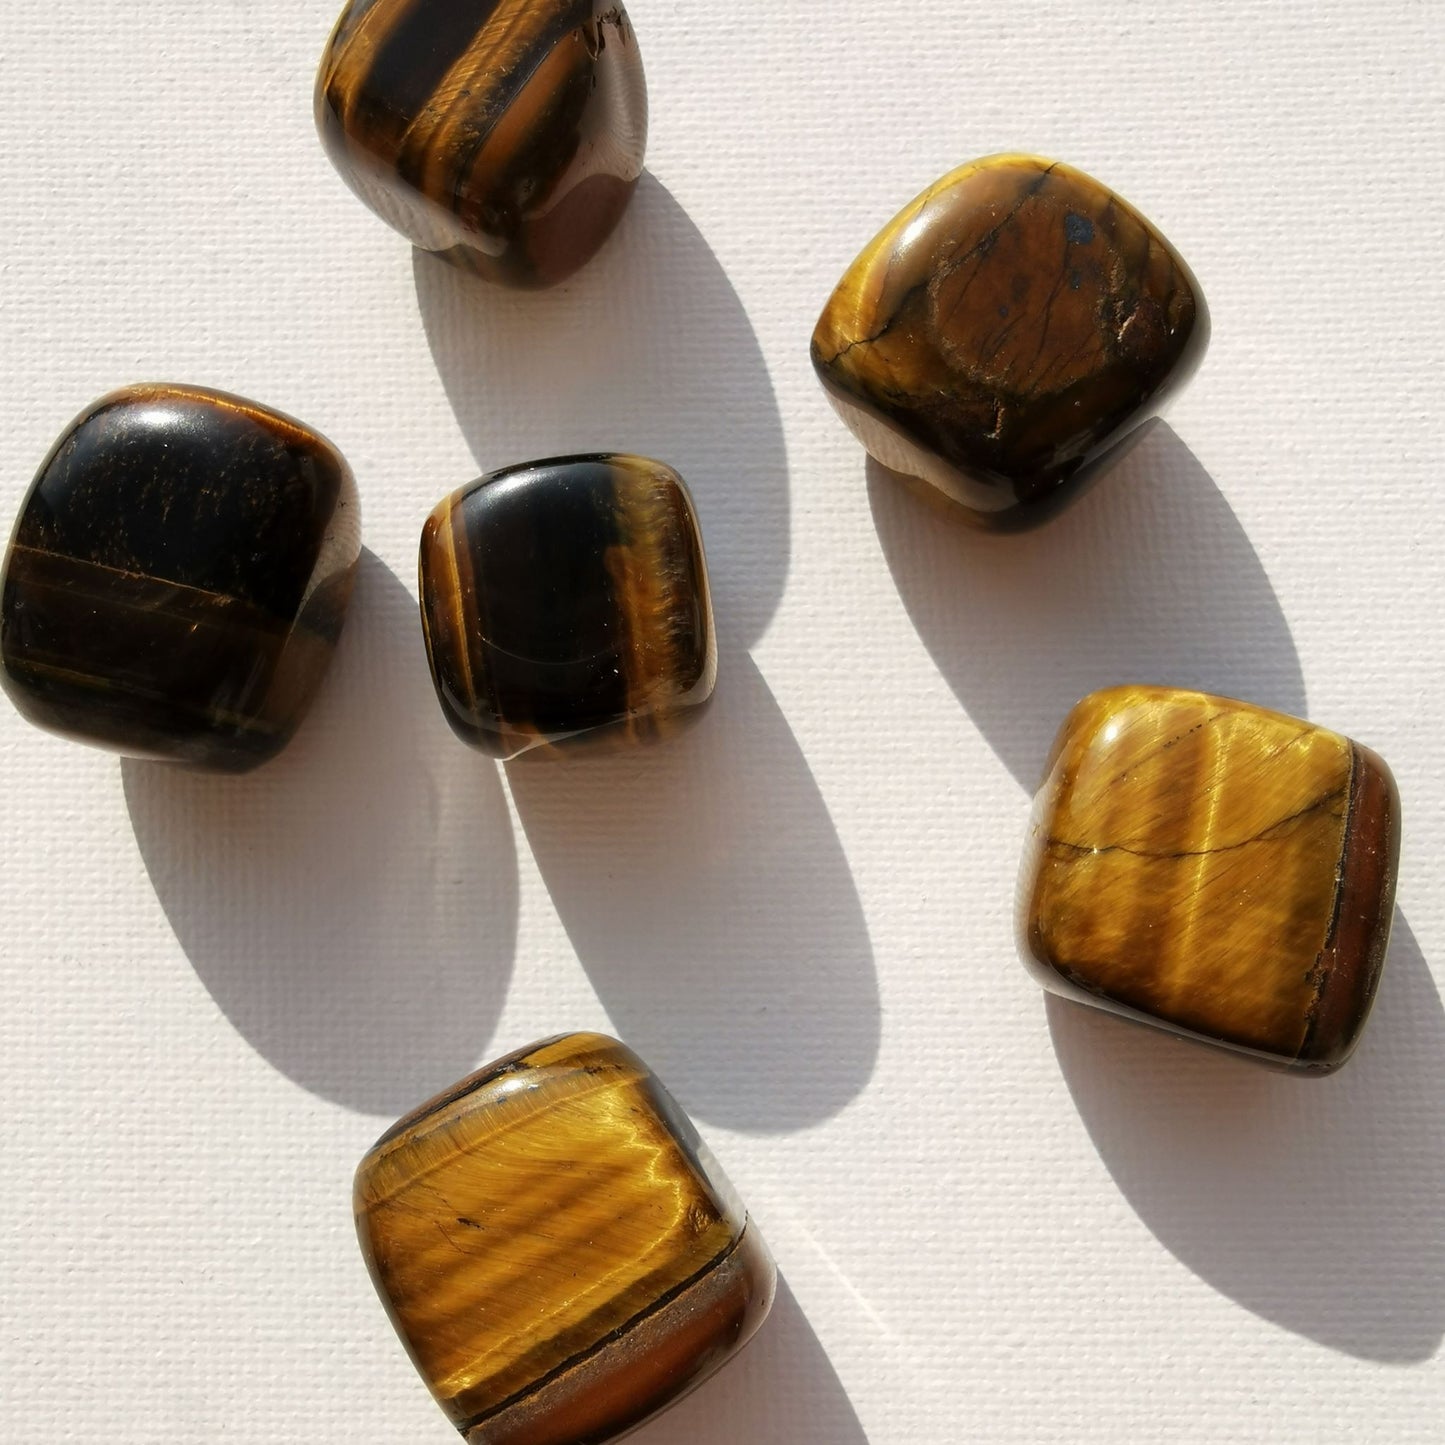 Dumi's Crystals | Square Tiger's Eye Tumbled Stones (Confidence & Success) | A collection of Square Tiger's Eye Tumbled Stones, each a reminder of the tiger's spirit. Square Tiger's Eye fosters strength, reduces stress & attracts success. Scatter them in your home or workspace to create a space overflowing with empowering energy and a sense of purpose.